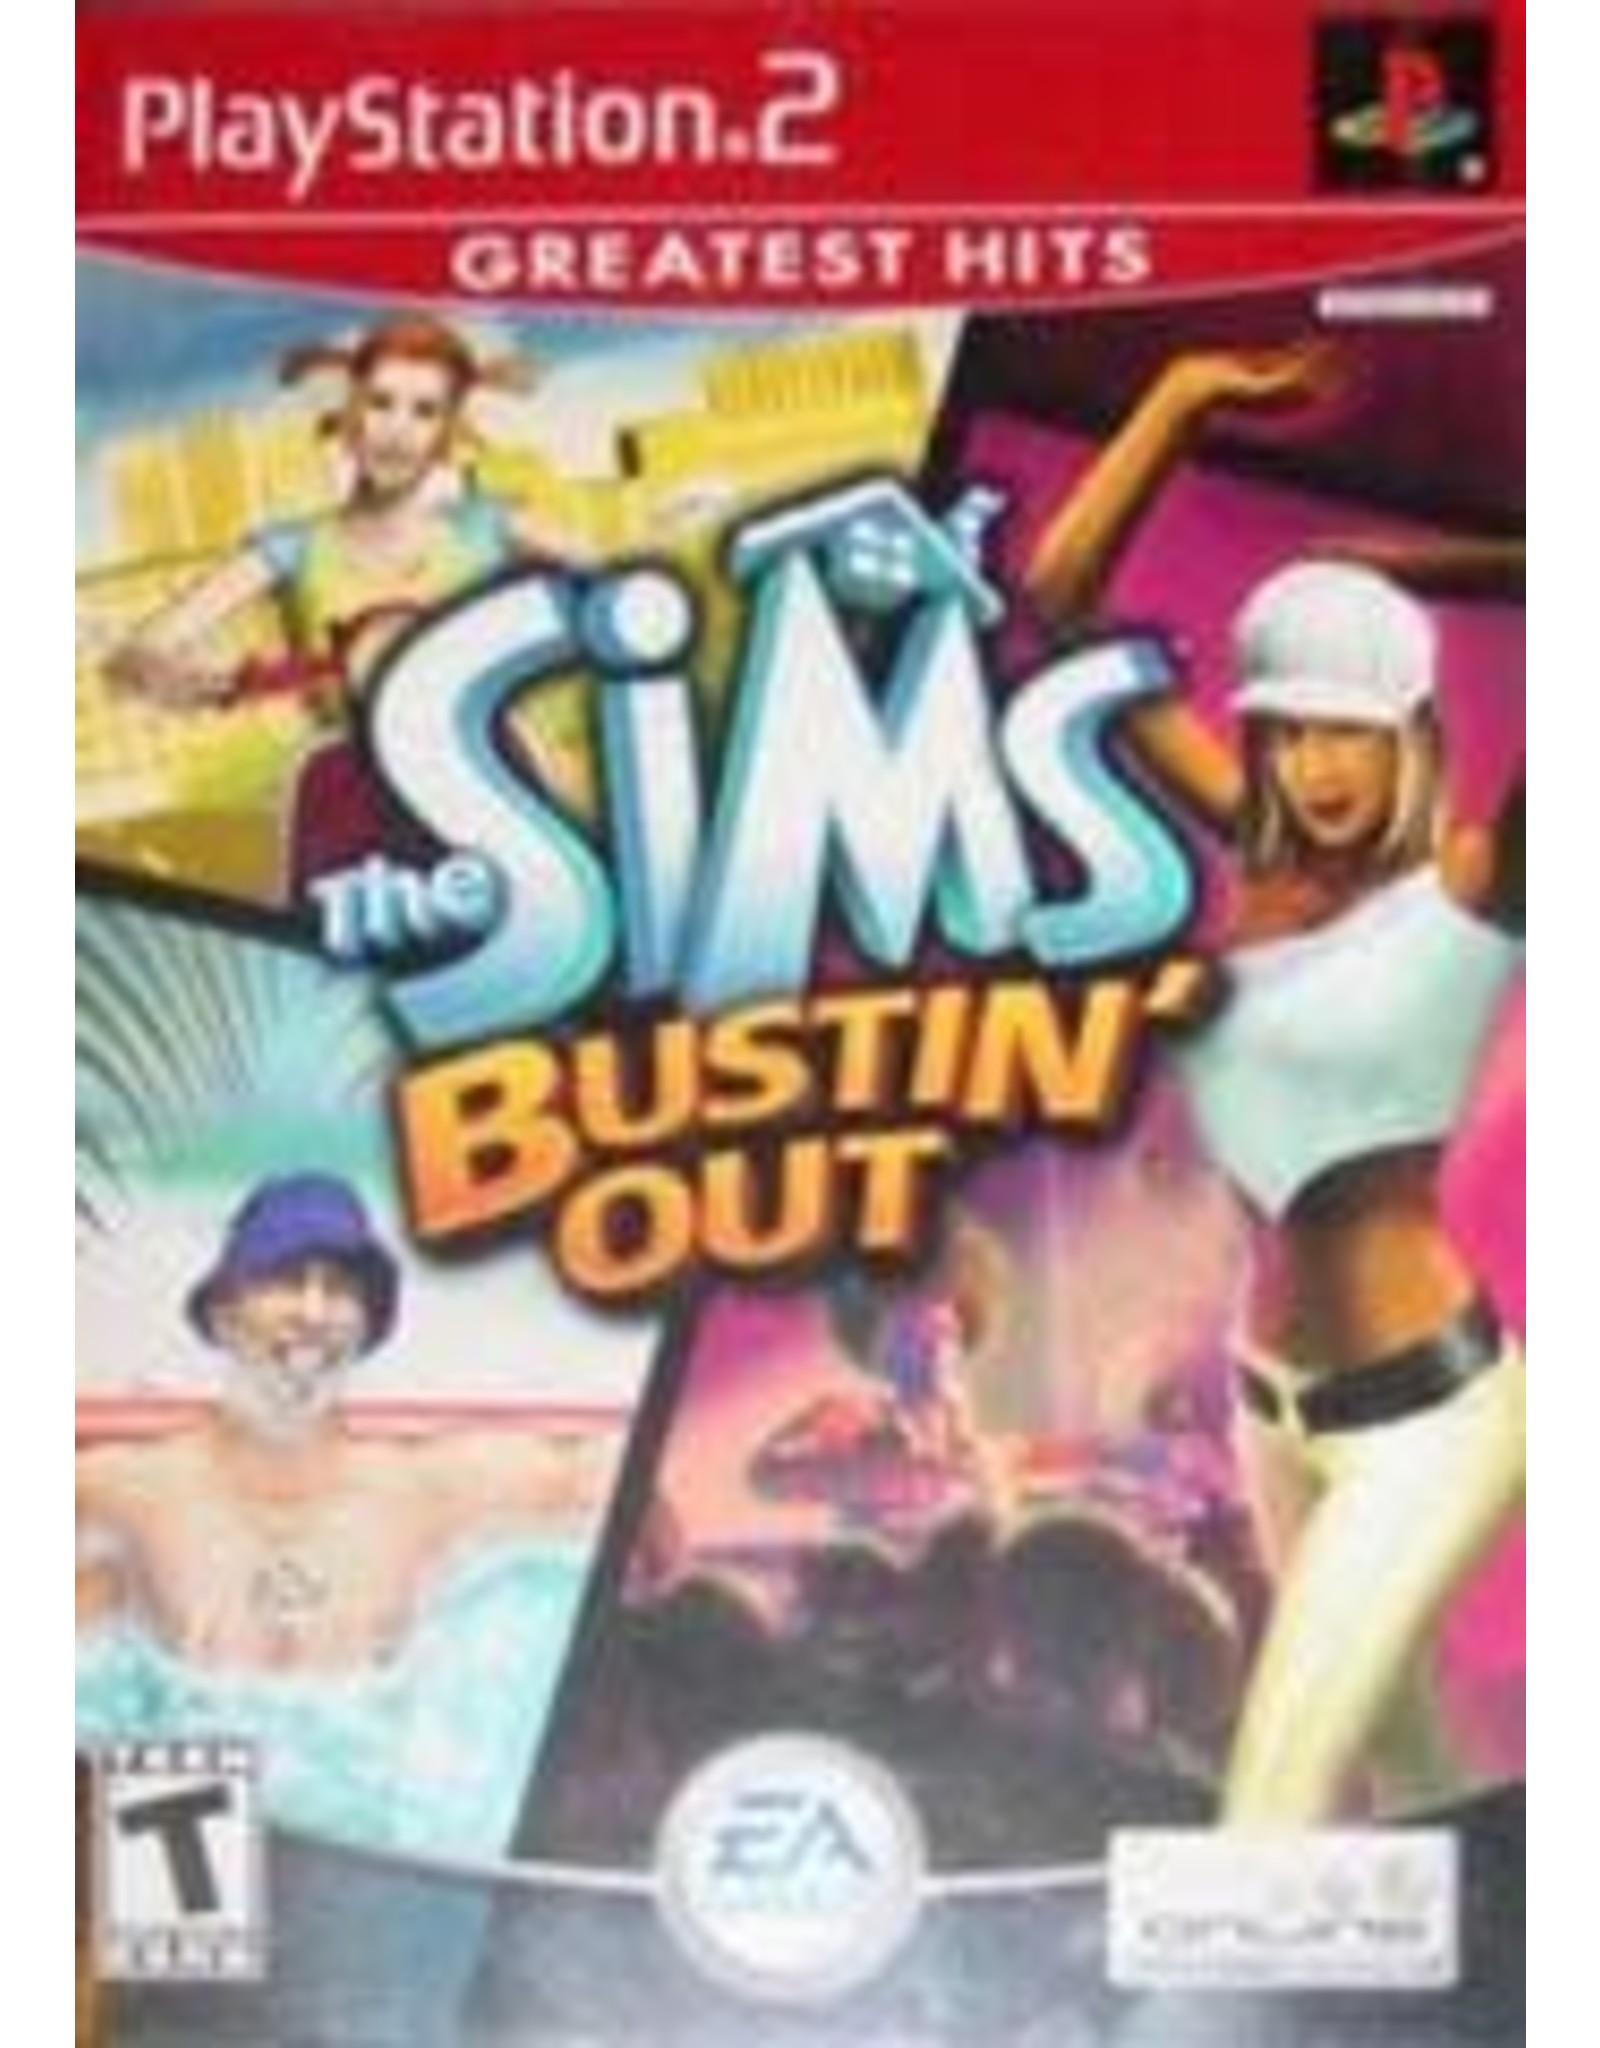 Playstation 2 Sims Bustin Out, The (Greatest Hits, CiB)